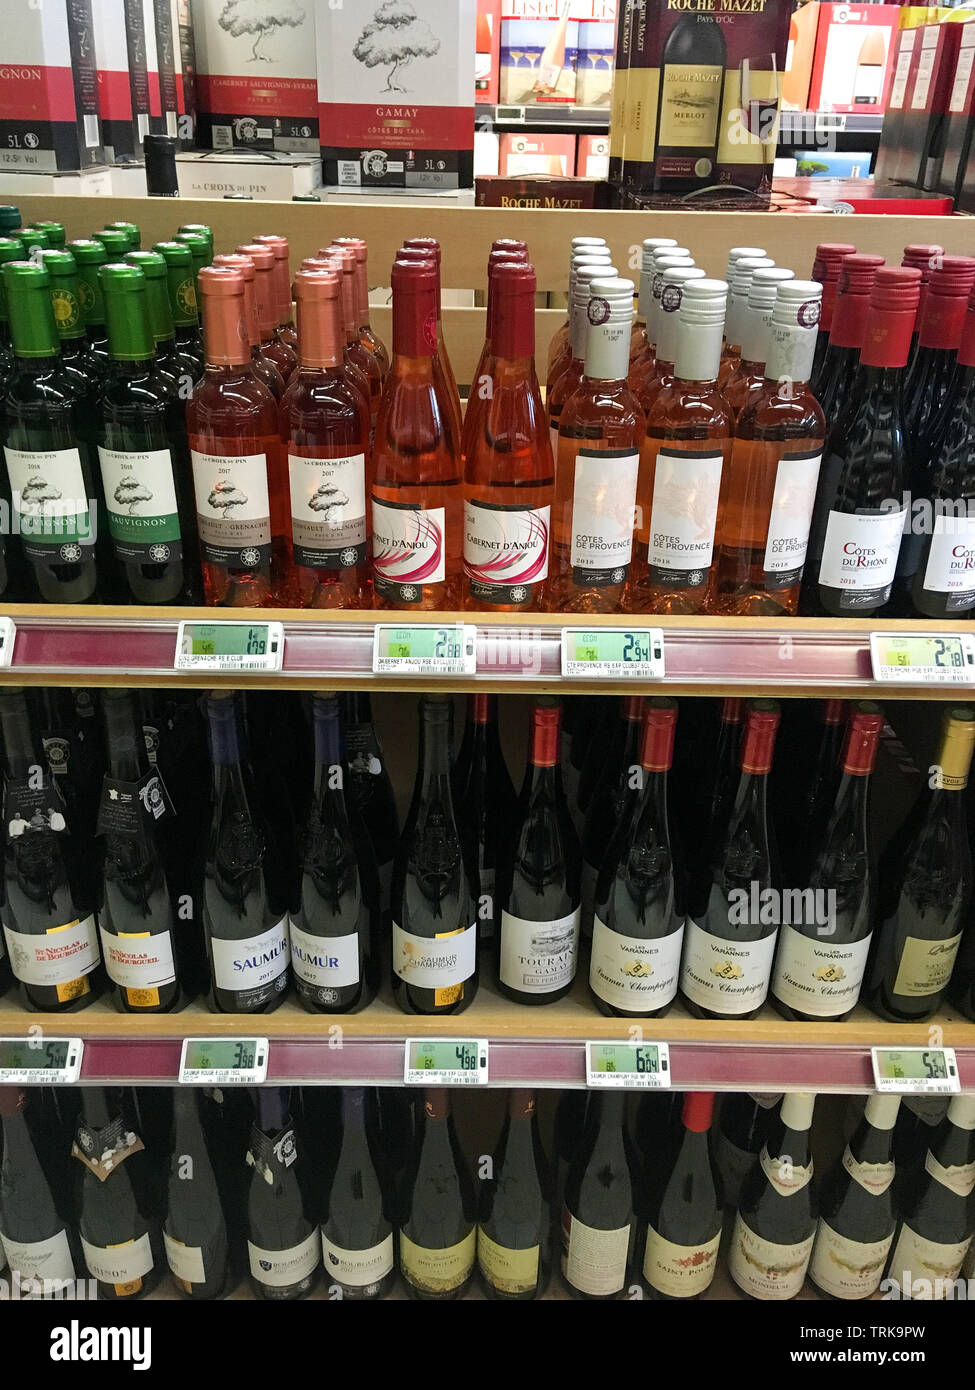 Wines section in a supermarket, France Stock Photo